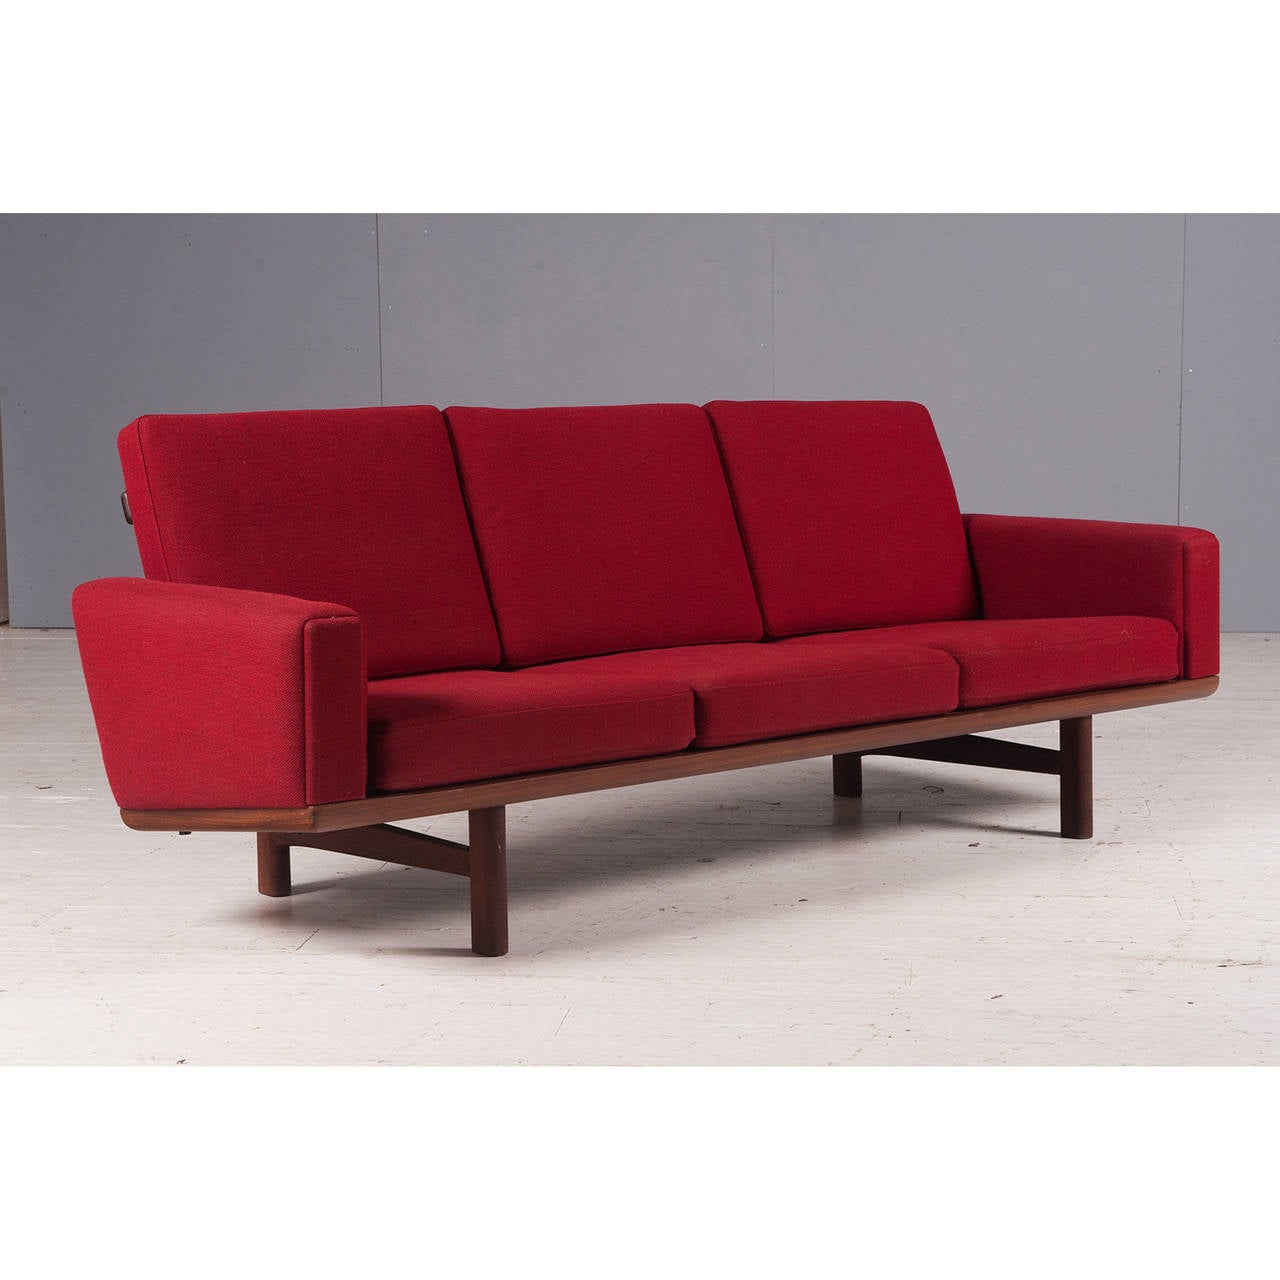 Hans Wegner believed furniture should be beautiful from every angle and the GE-236 is fine example of this. With it's exposed timber backing, this sofa would look stunning as the central feature of a room. 
This is a design classic in its original